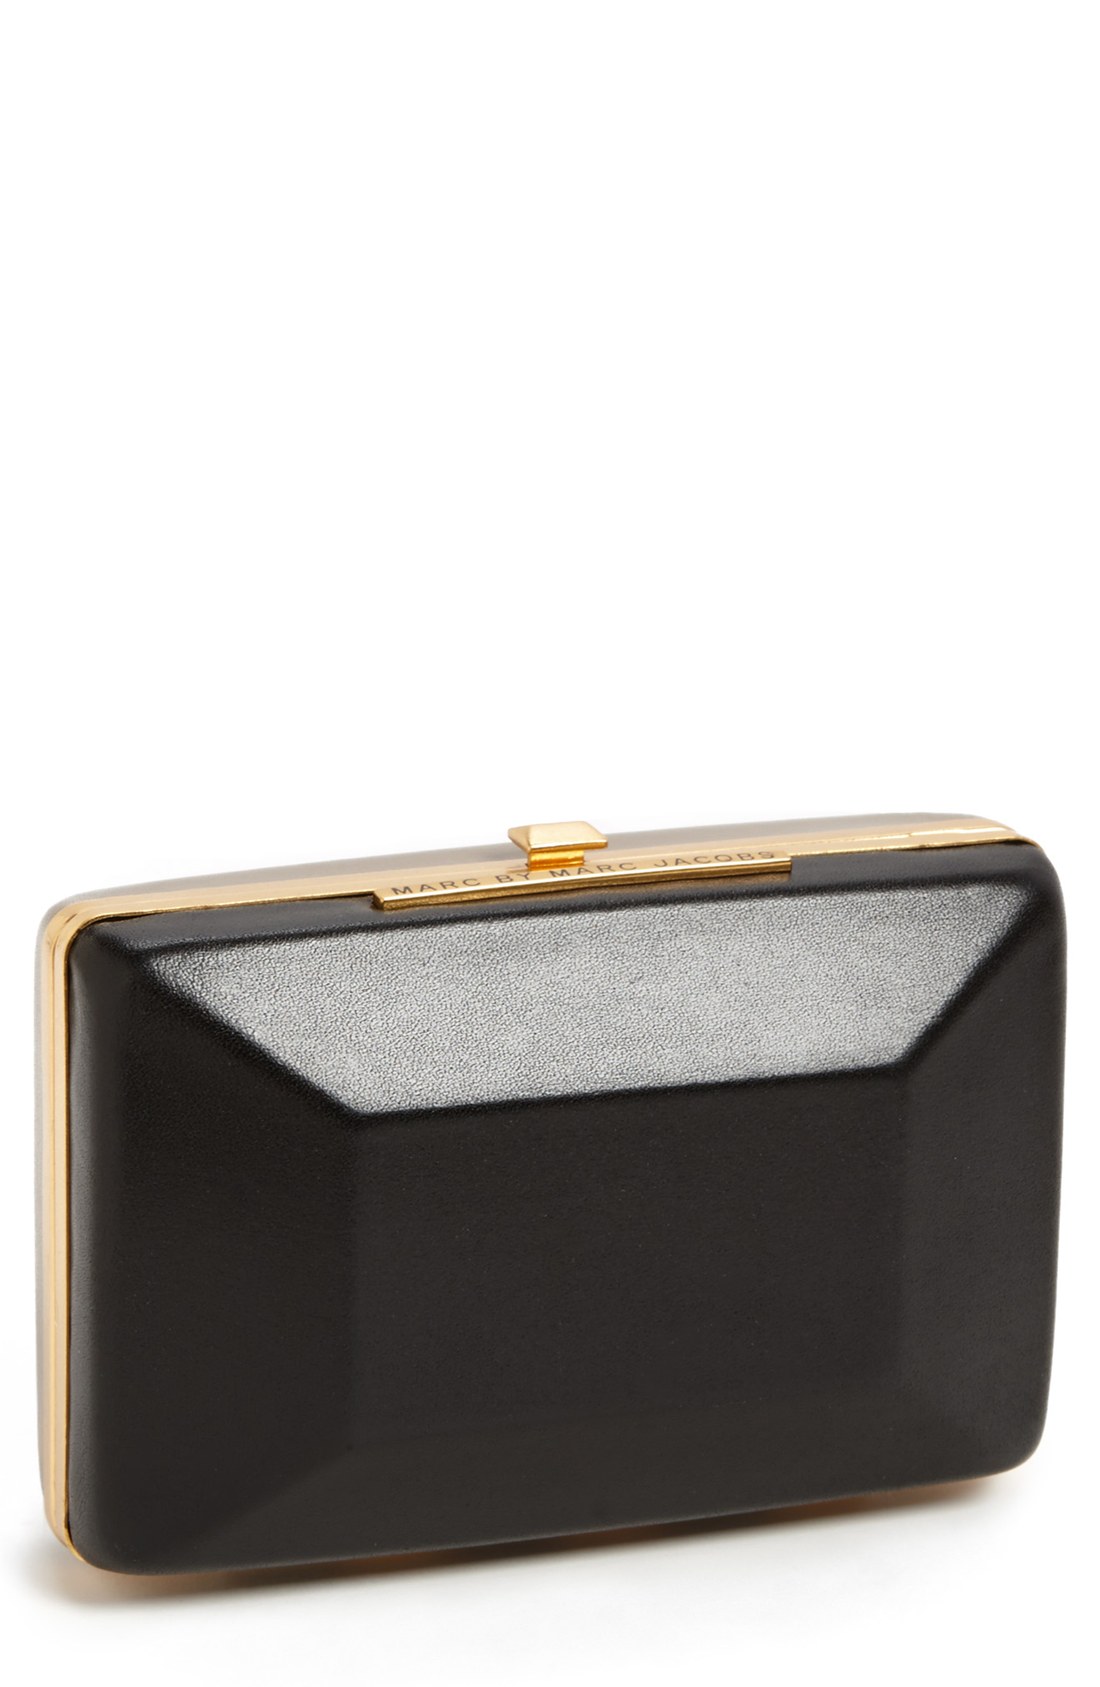 Marc By Marc Jacobs Box It Up Colorblock Leather Clutch in Black (Warm ...